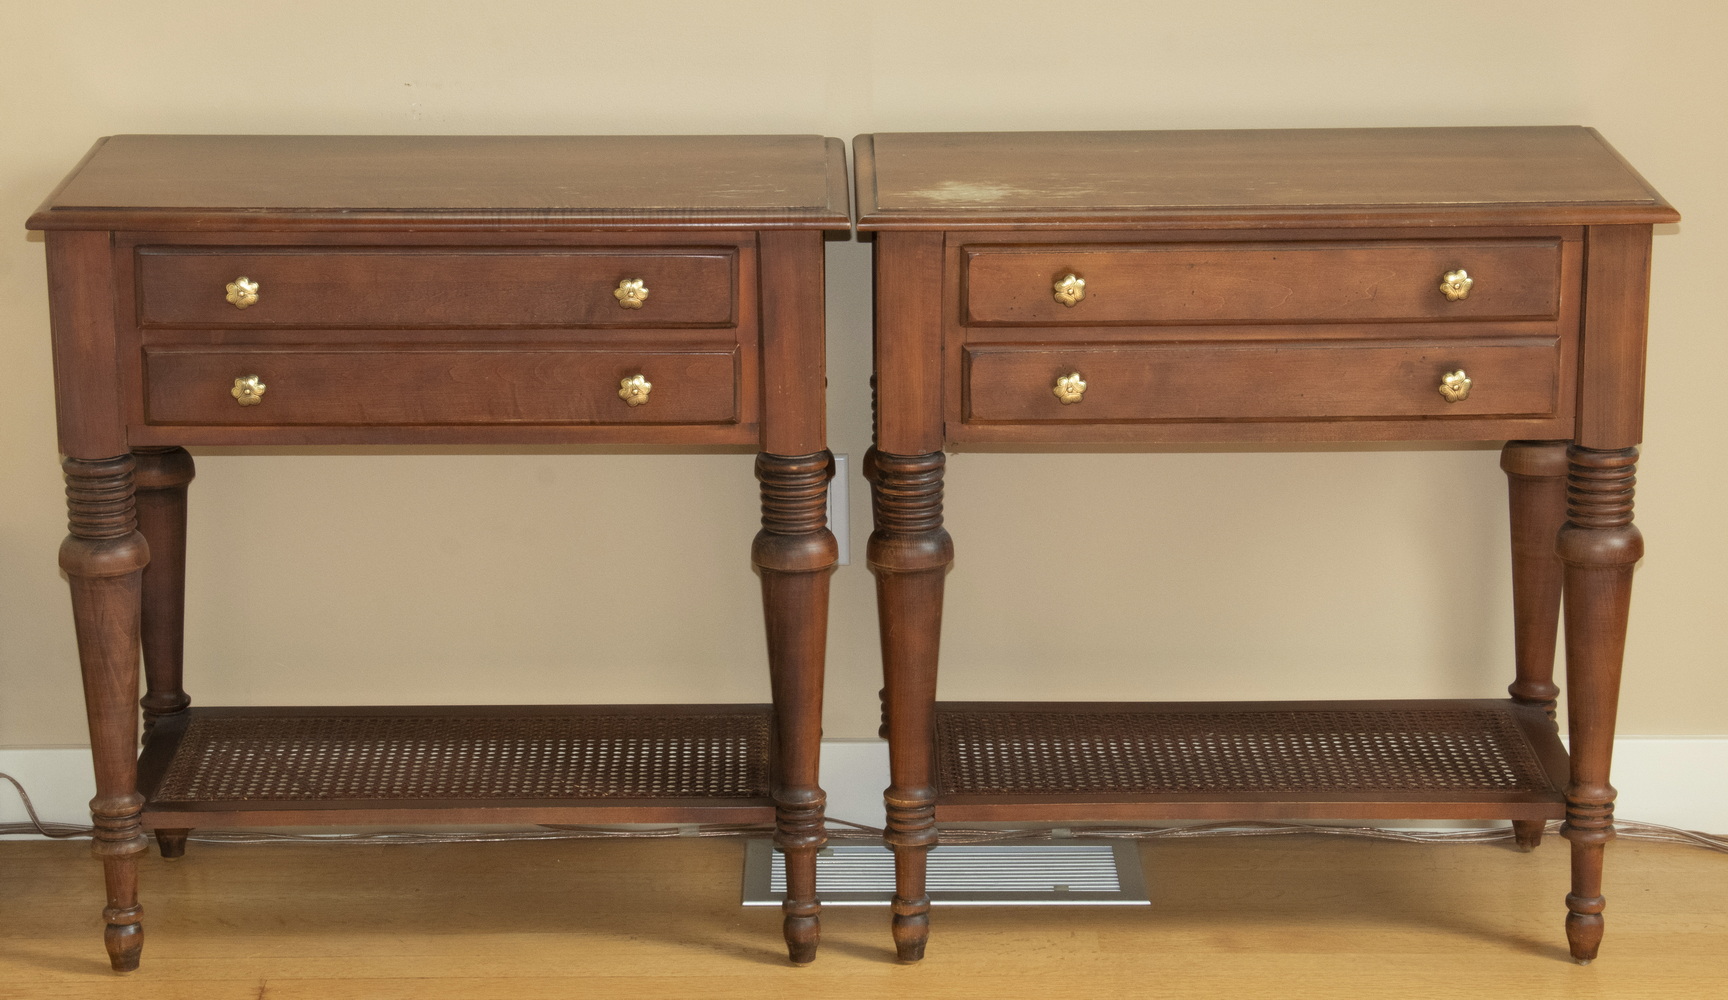 PAIR OF SIDE TABLES WITH CANED